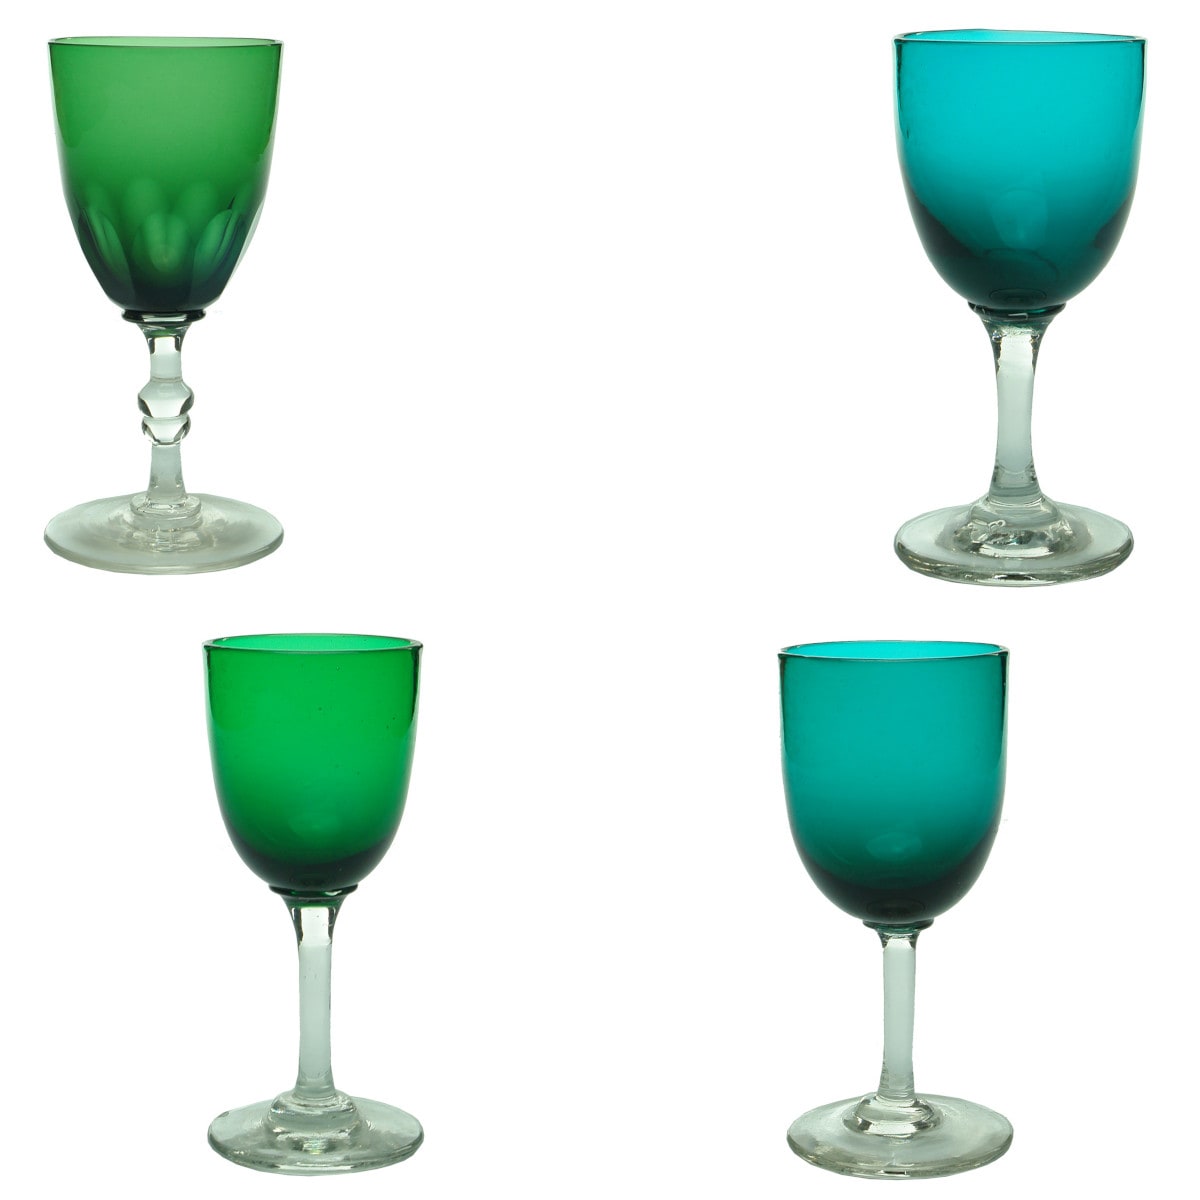 Early Glass. Four different Victorian/Georgian small green wine glasses with clear stems.